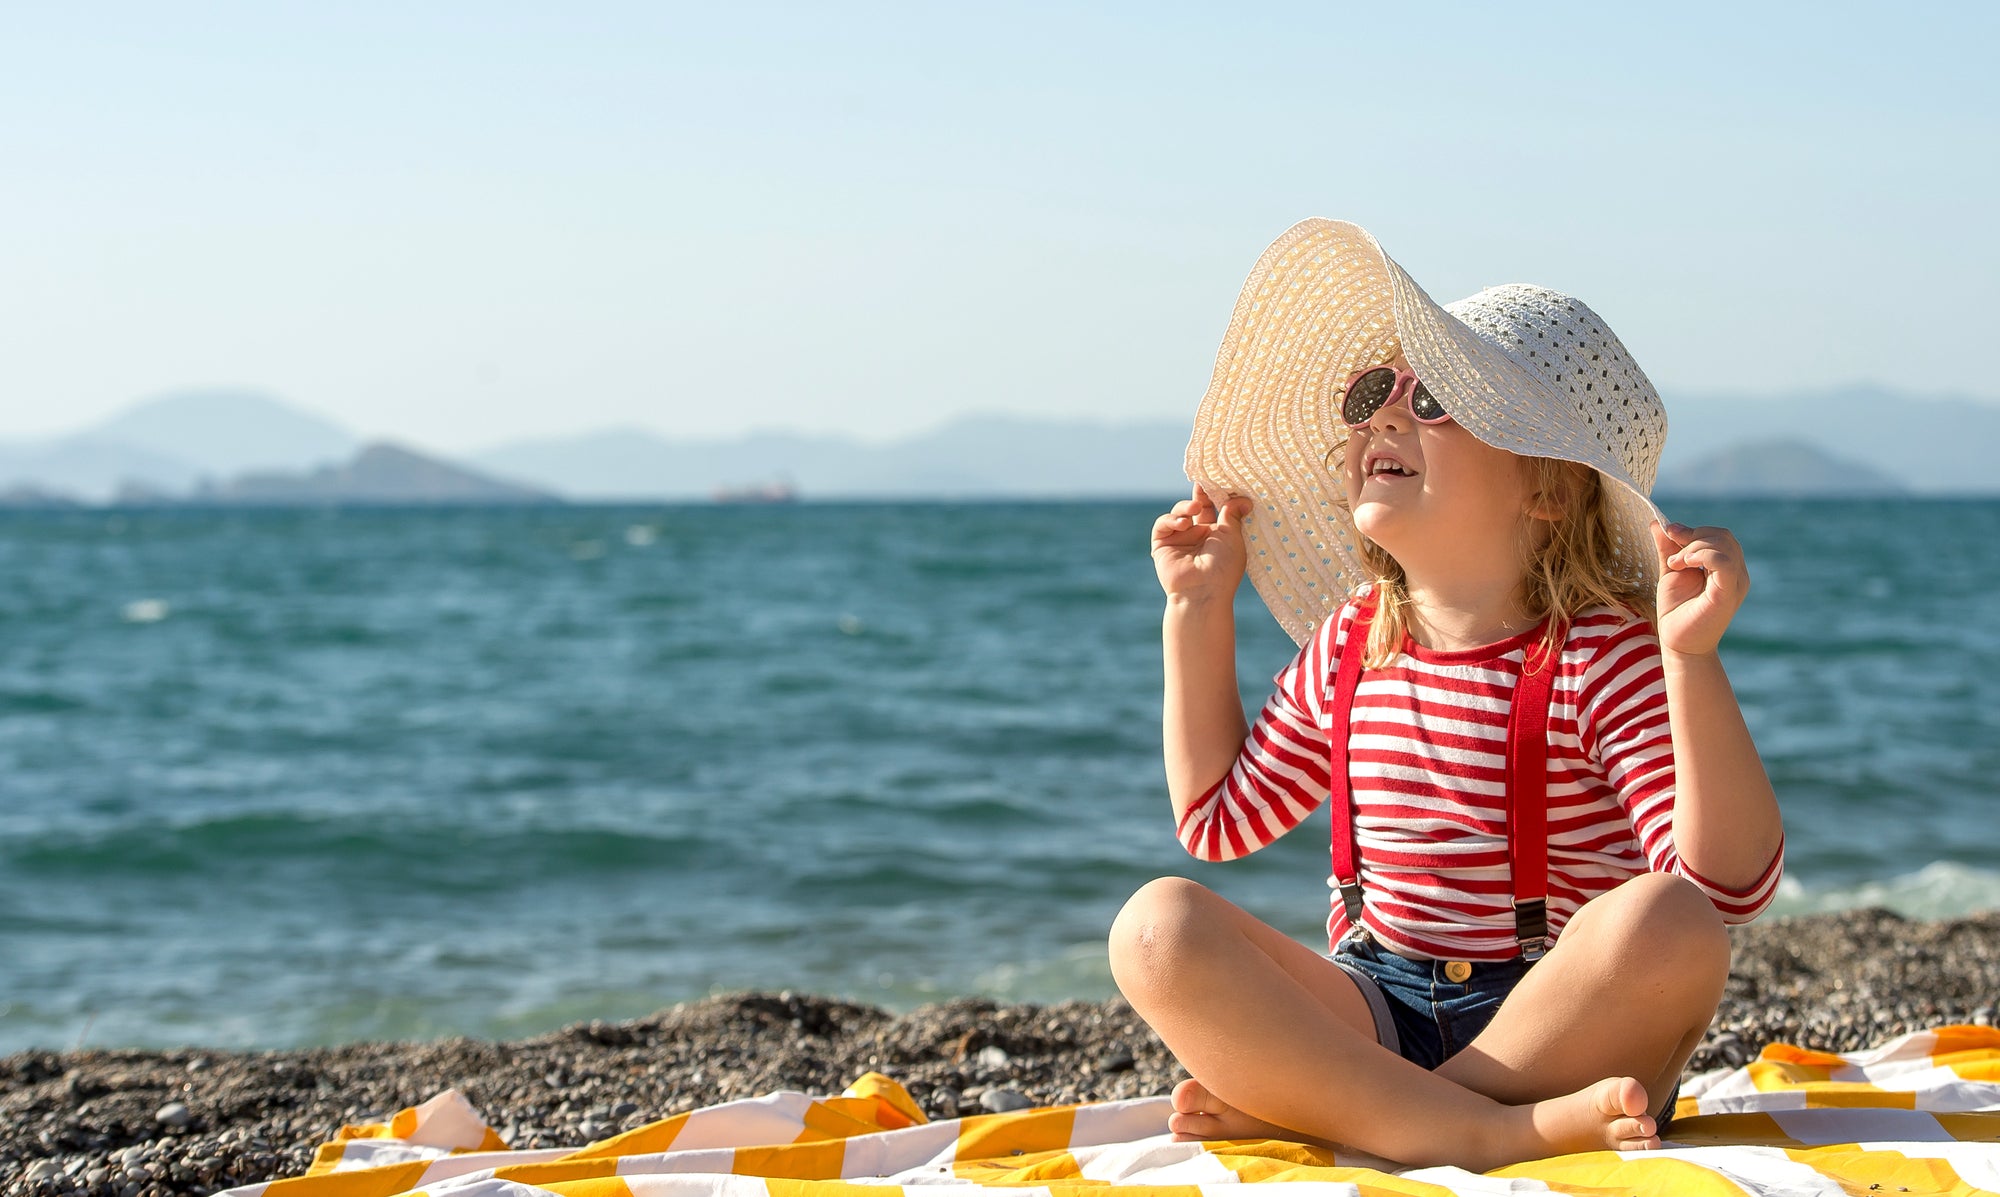 The Top 10 Tips You Need to Know Heading into Summer